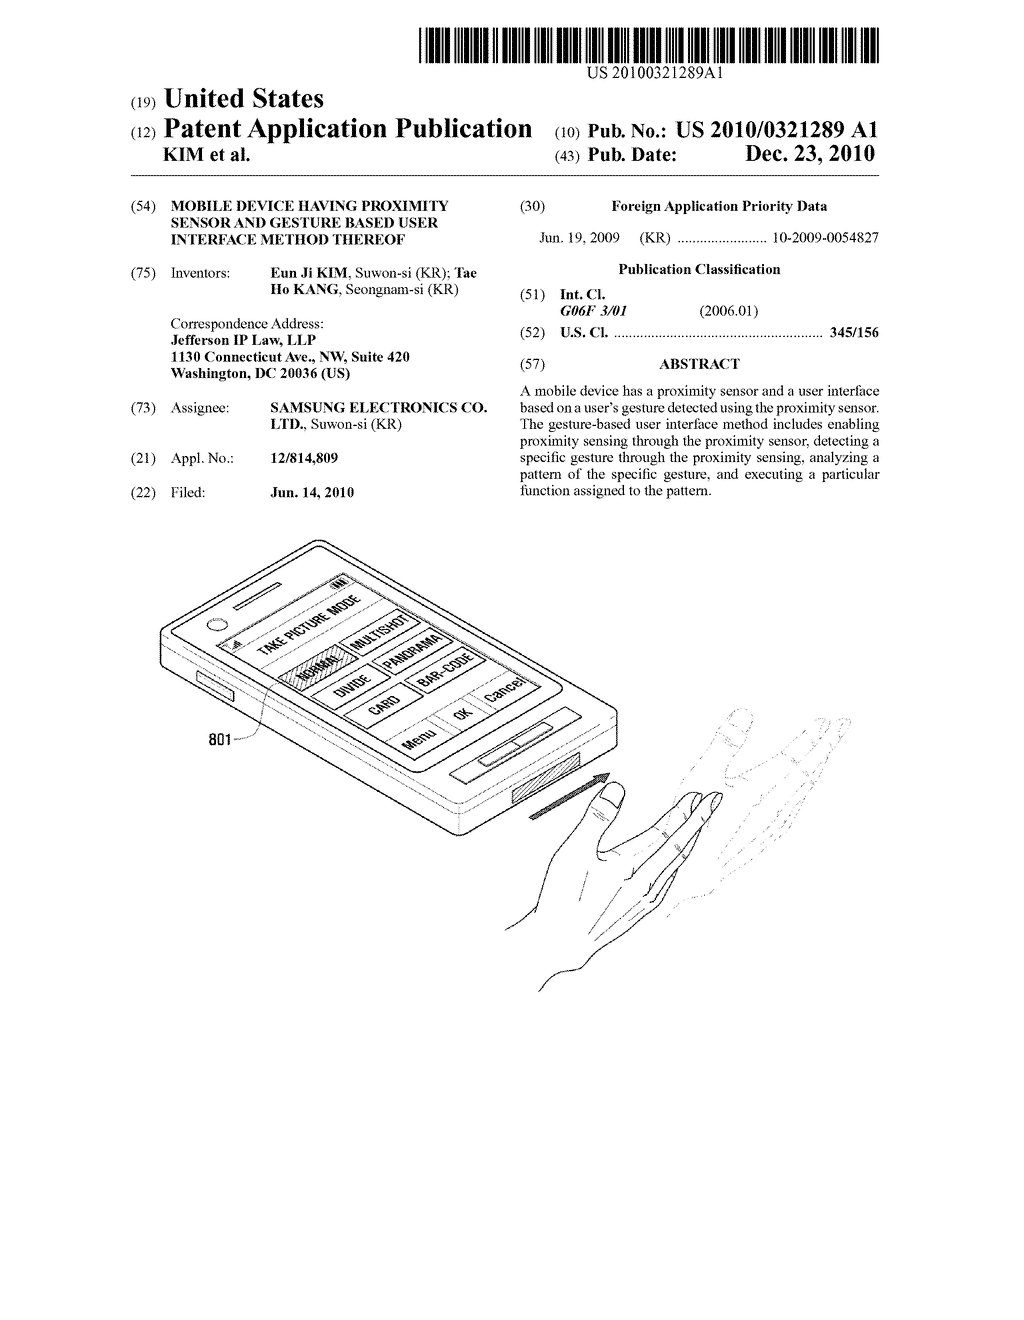 MOBILE DEVICE HAVING PROXIMITY SENSOR AND GESTURE BASED USER INTERFACE METHOD THEREOF - diagram, schematic, and image 01